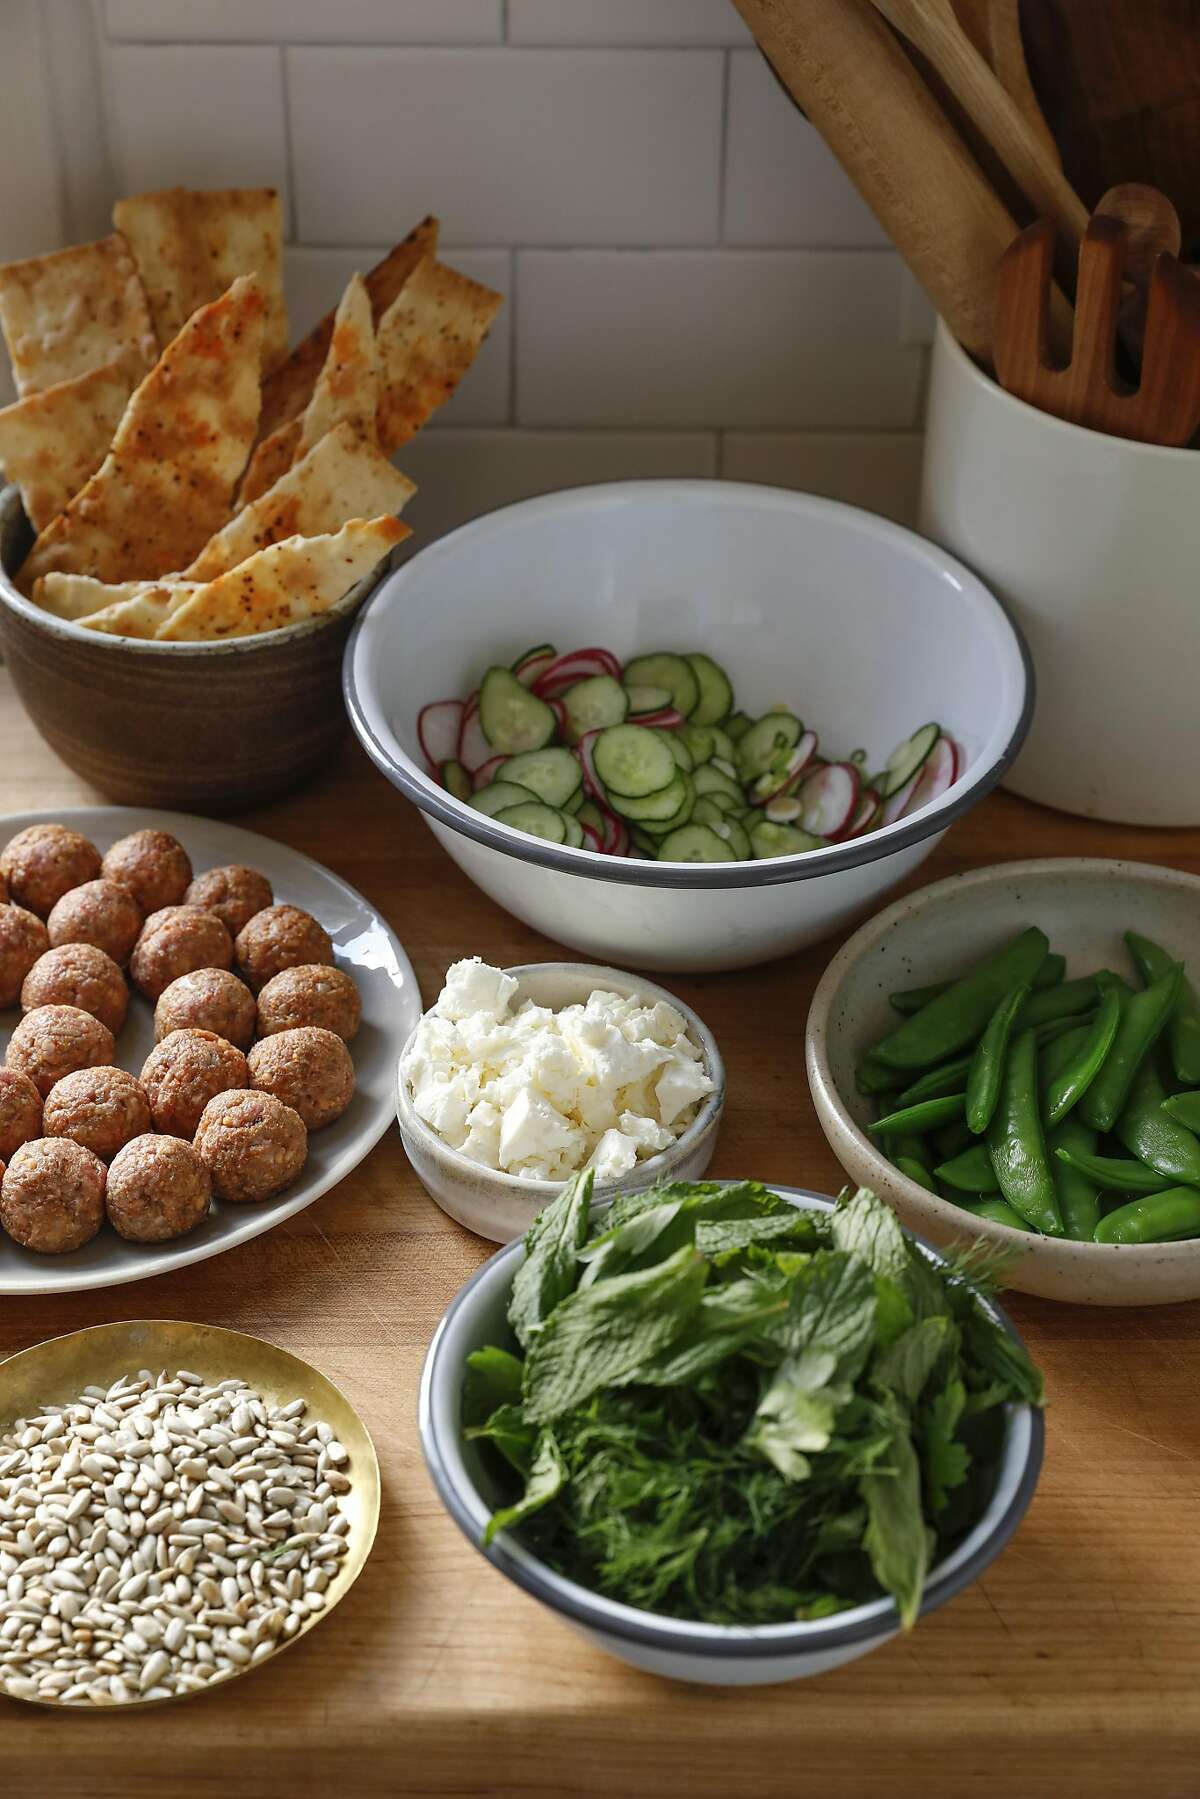 Ingredients for Jessica Battilana's Lamb Meatball Salad, seen on Friday, April 28, 2017 in San Francisco, Calif., include lamb meatballs, left, toasted lavash with Aleppo Pepper, cucumbers, sugar snap peas, Italian flatleaf parsley, dill, mint, toasted sunflower seeds, and feta cheese.